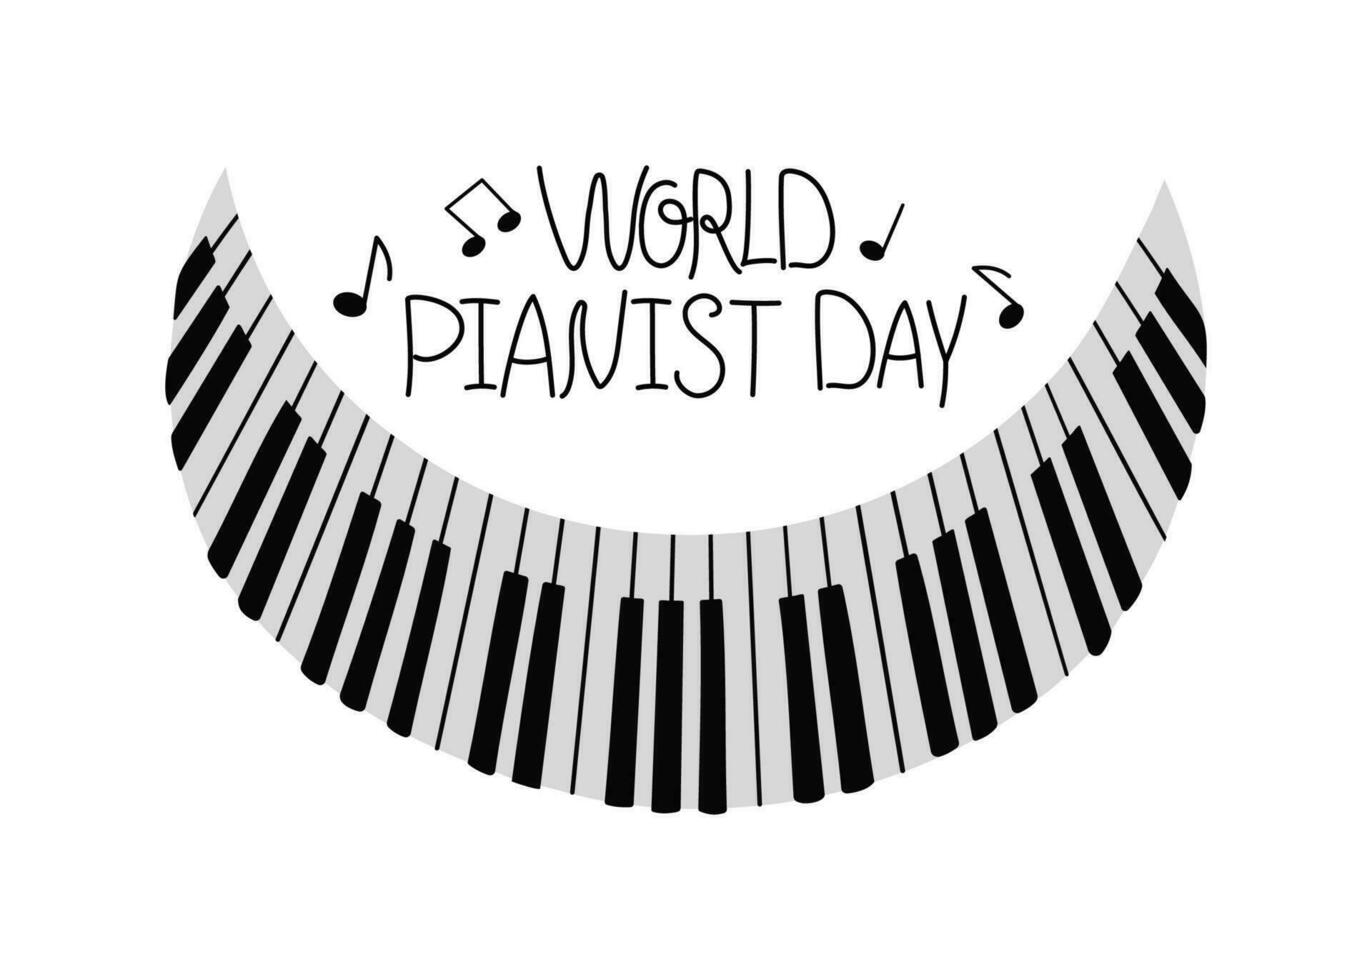 World piano day. Day of music. Keys of the piano, musical instrument. Play the piano. Musical performance, notes and signs. Vector illustration.